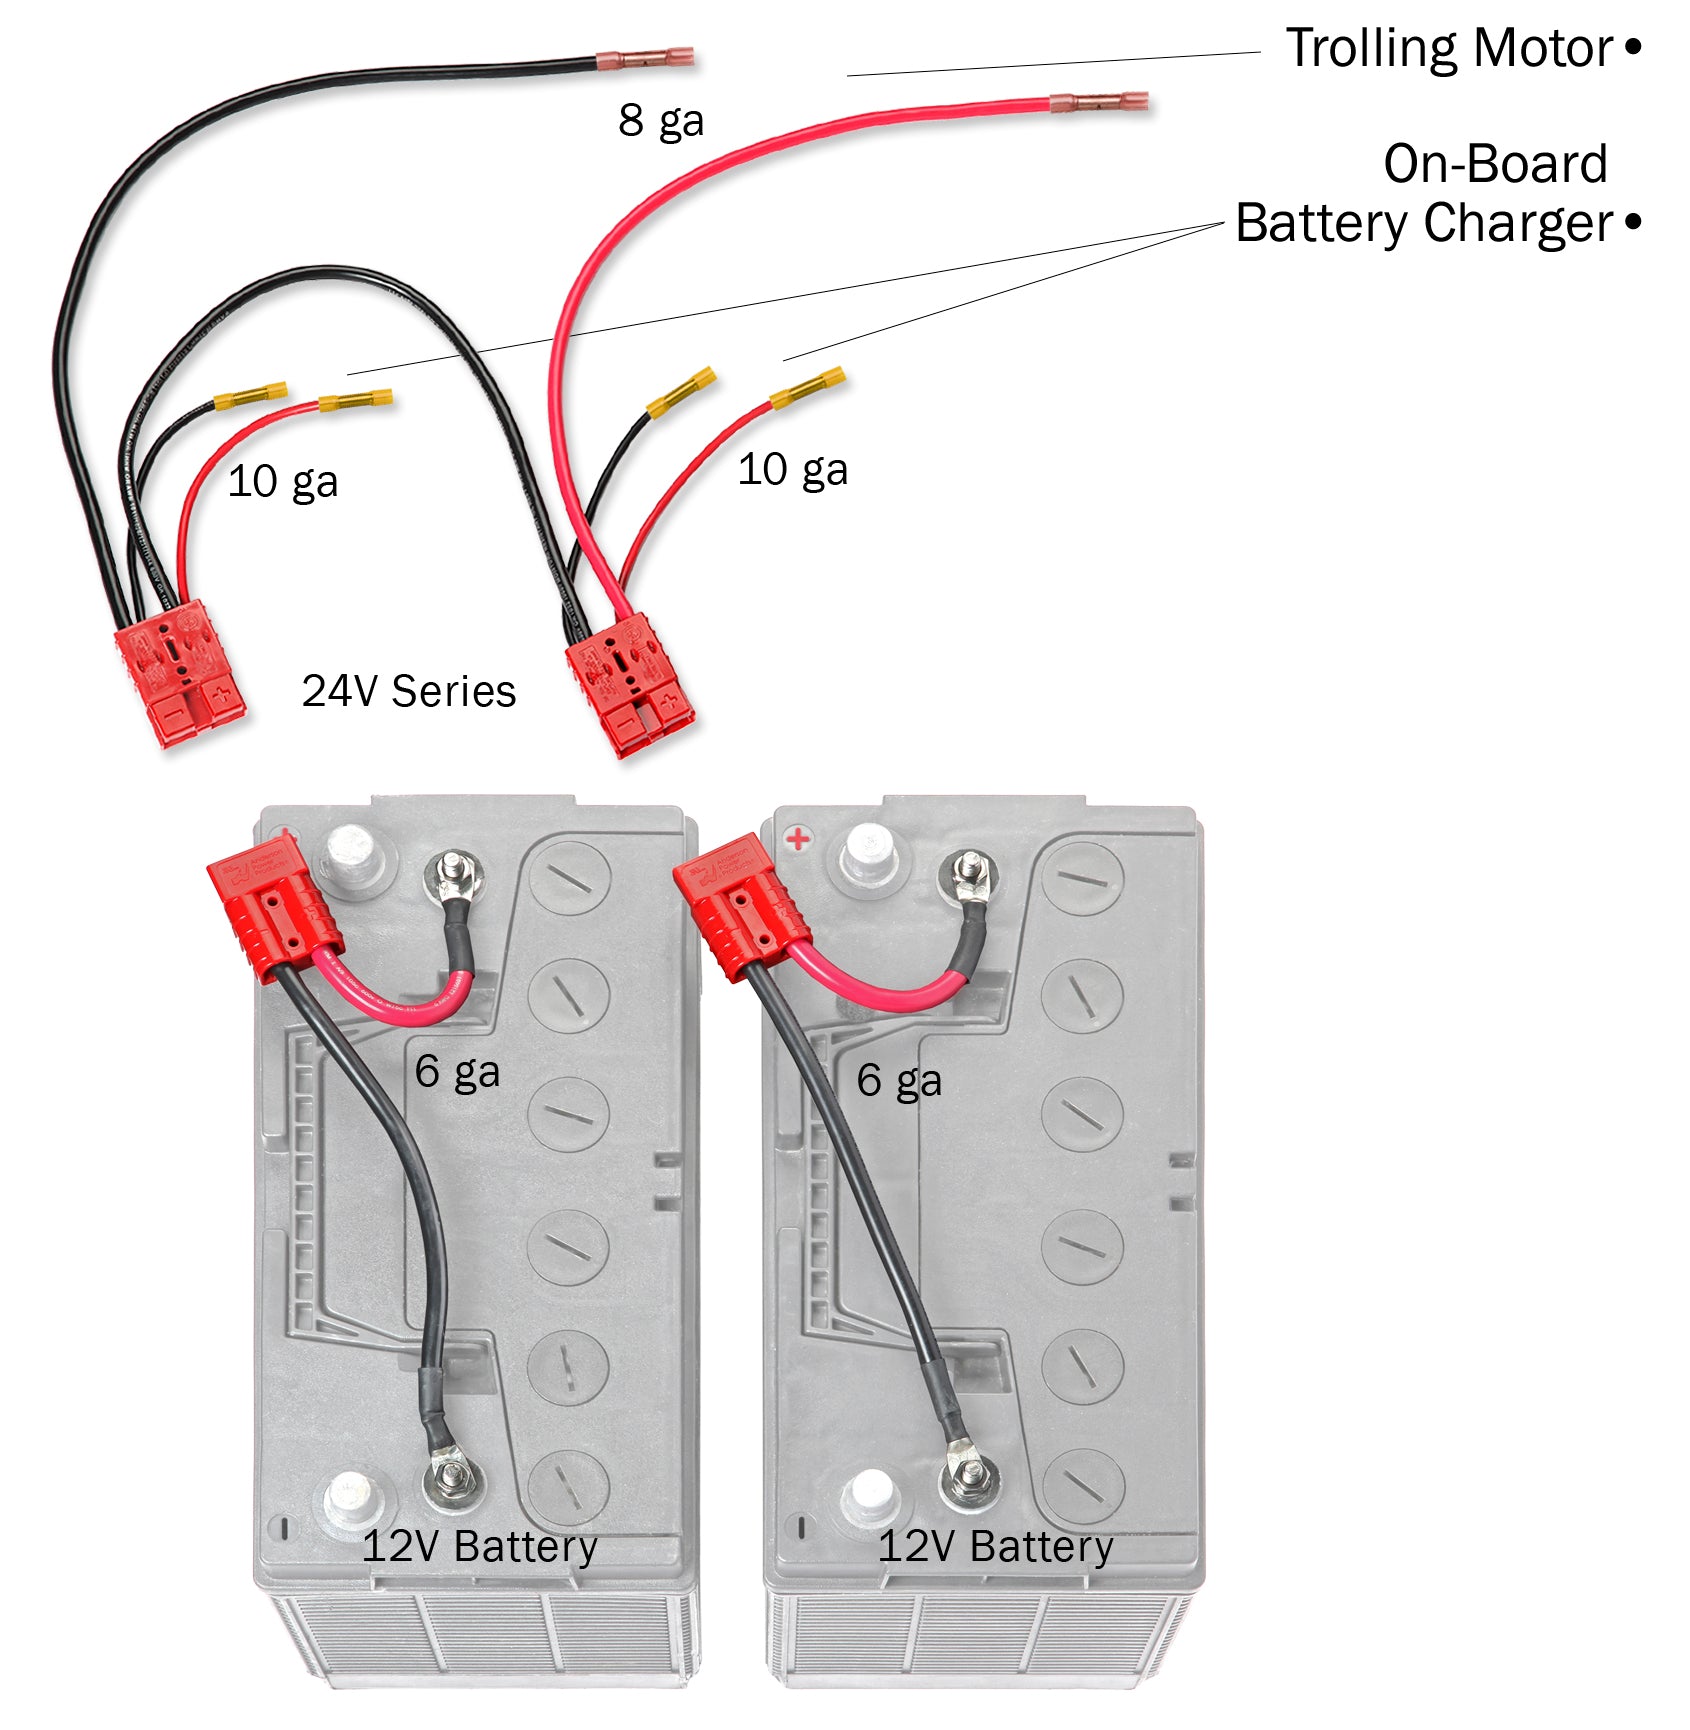 24v Series Trolling Motor Connection Kit w/ On-board Charging by Connect  Ease – Connect-Ease. Get Connected Connect all your marine equipment with  ease.